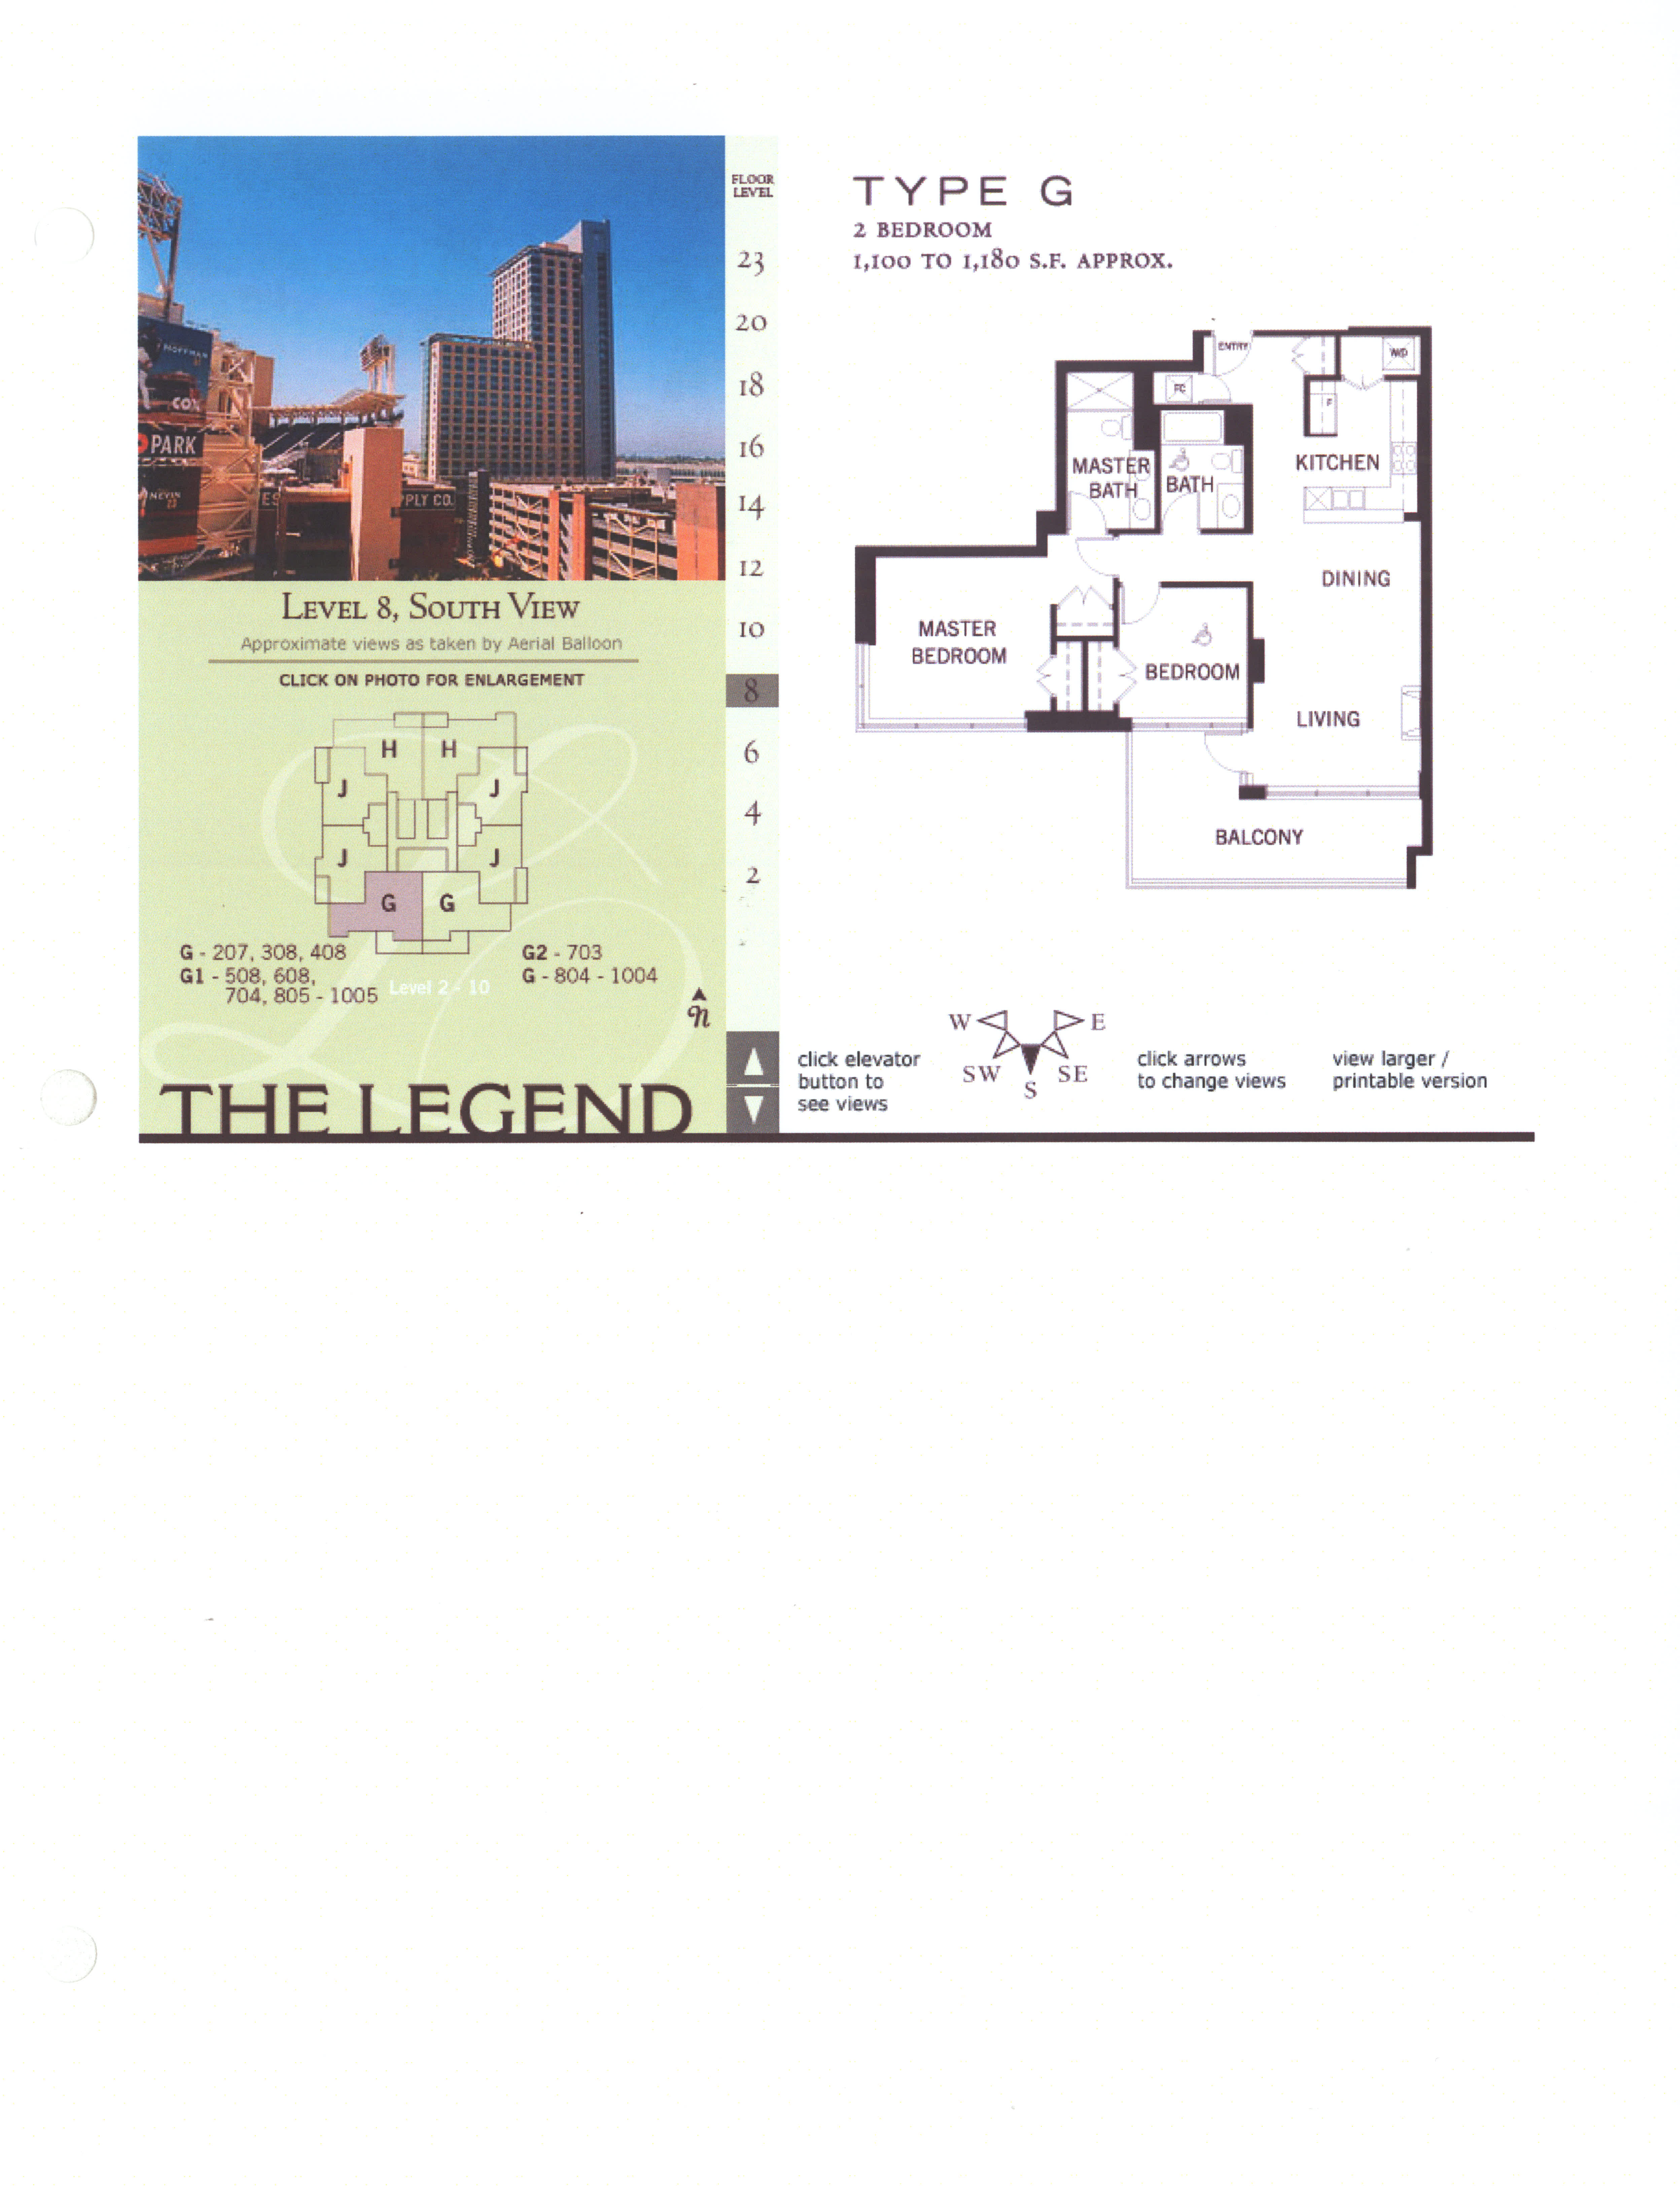 The Legend Floor Plan Level 8, South View- Type G